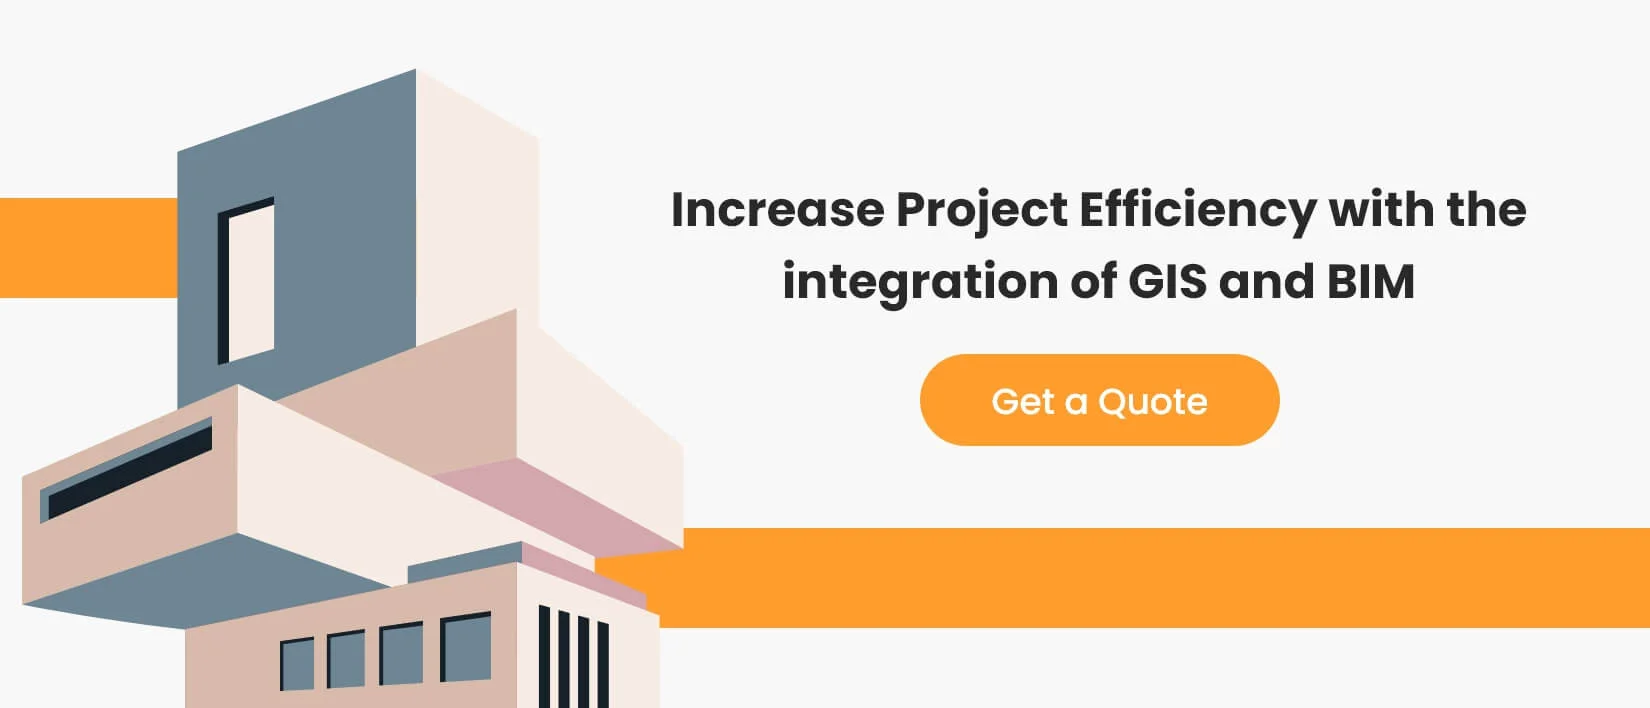 Increase Project Efficiency with the integration of GIS and BIM